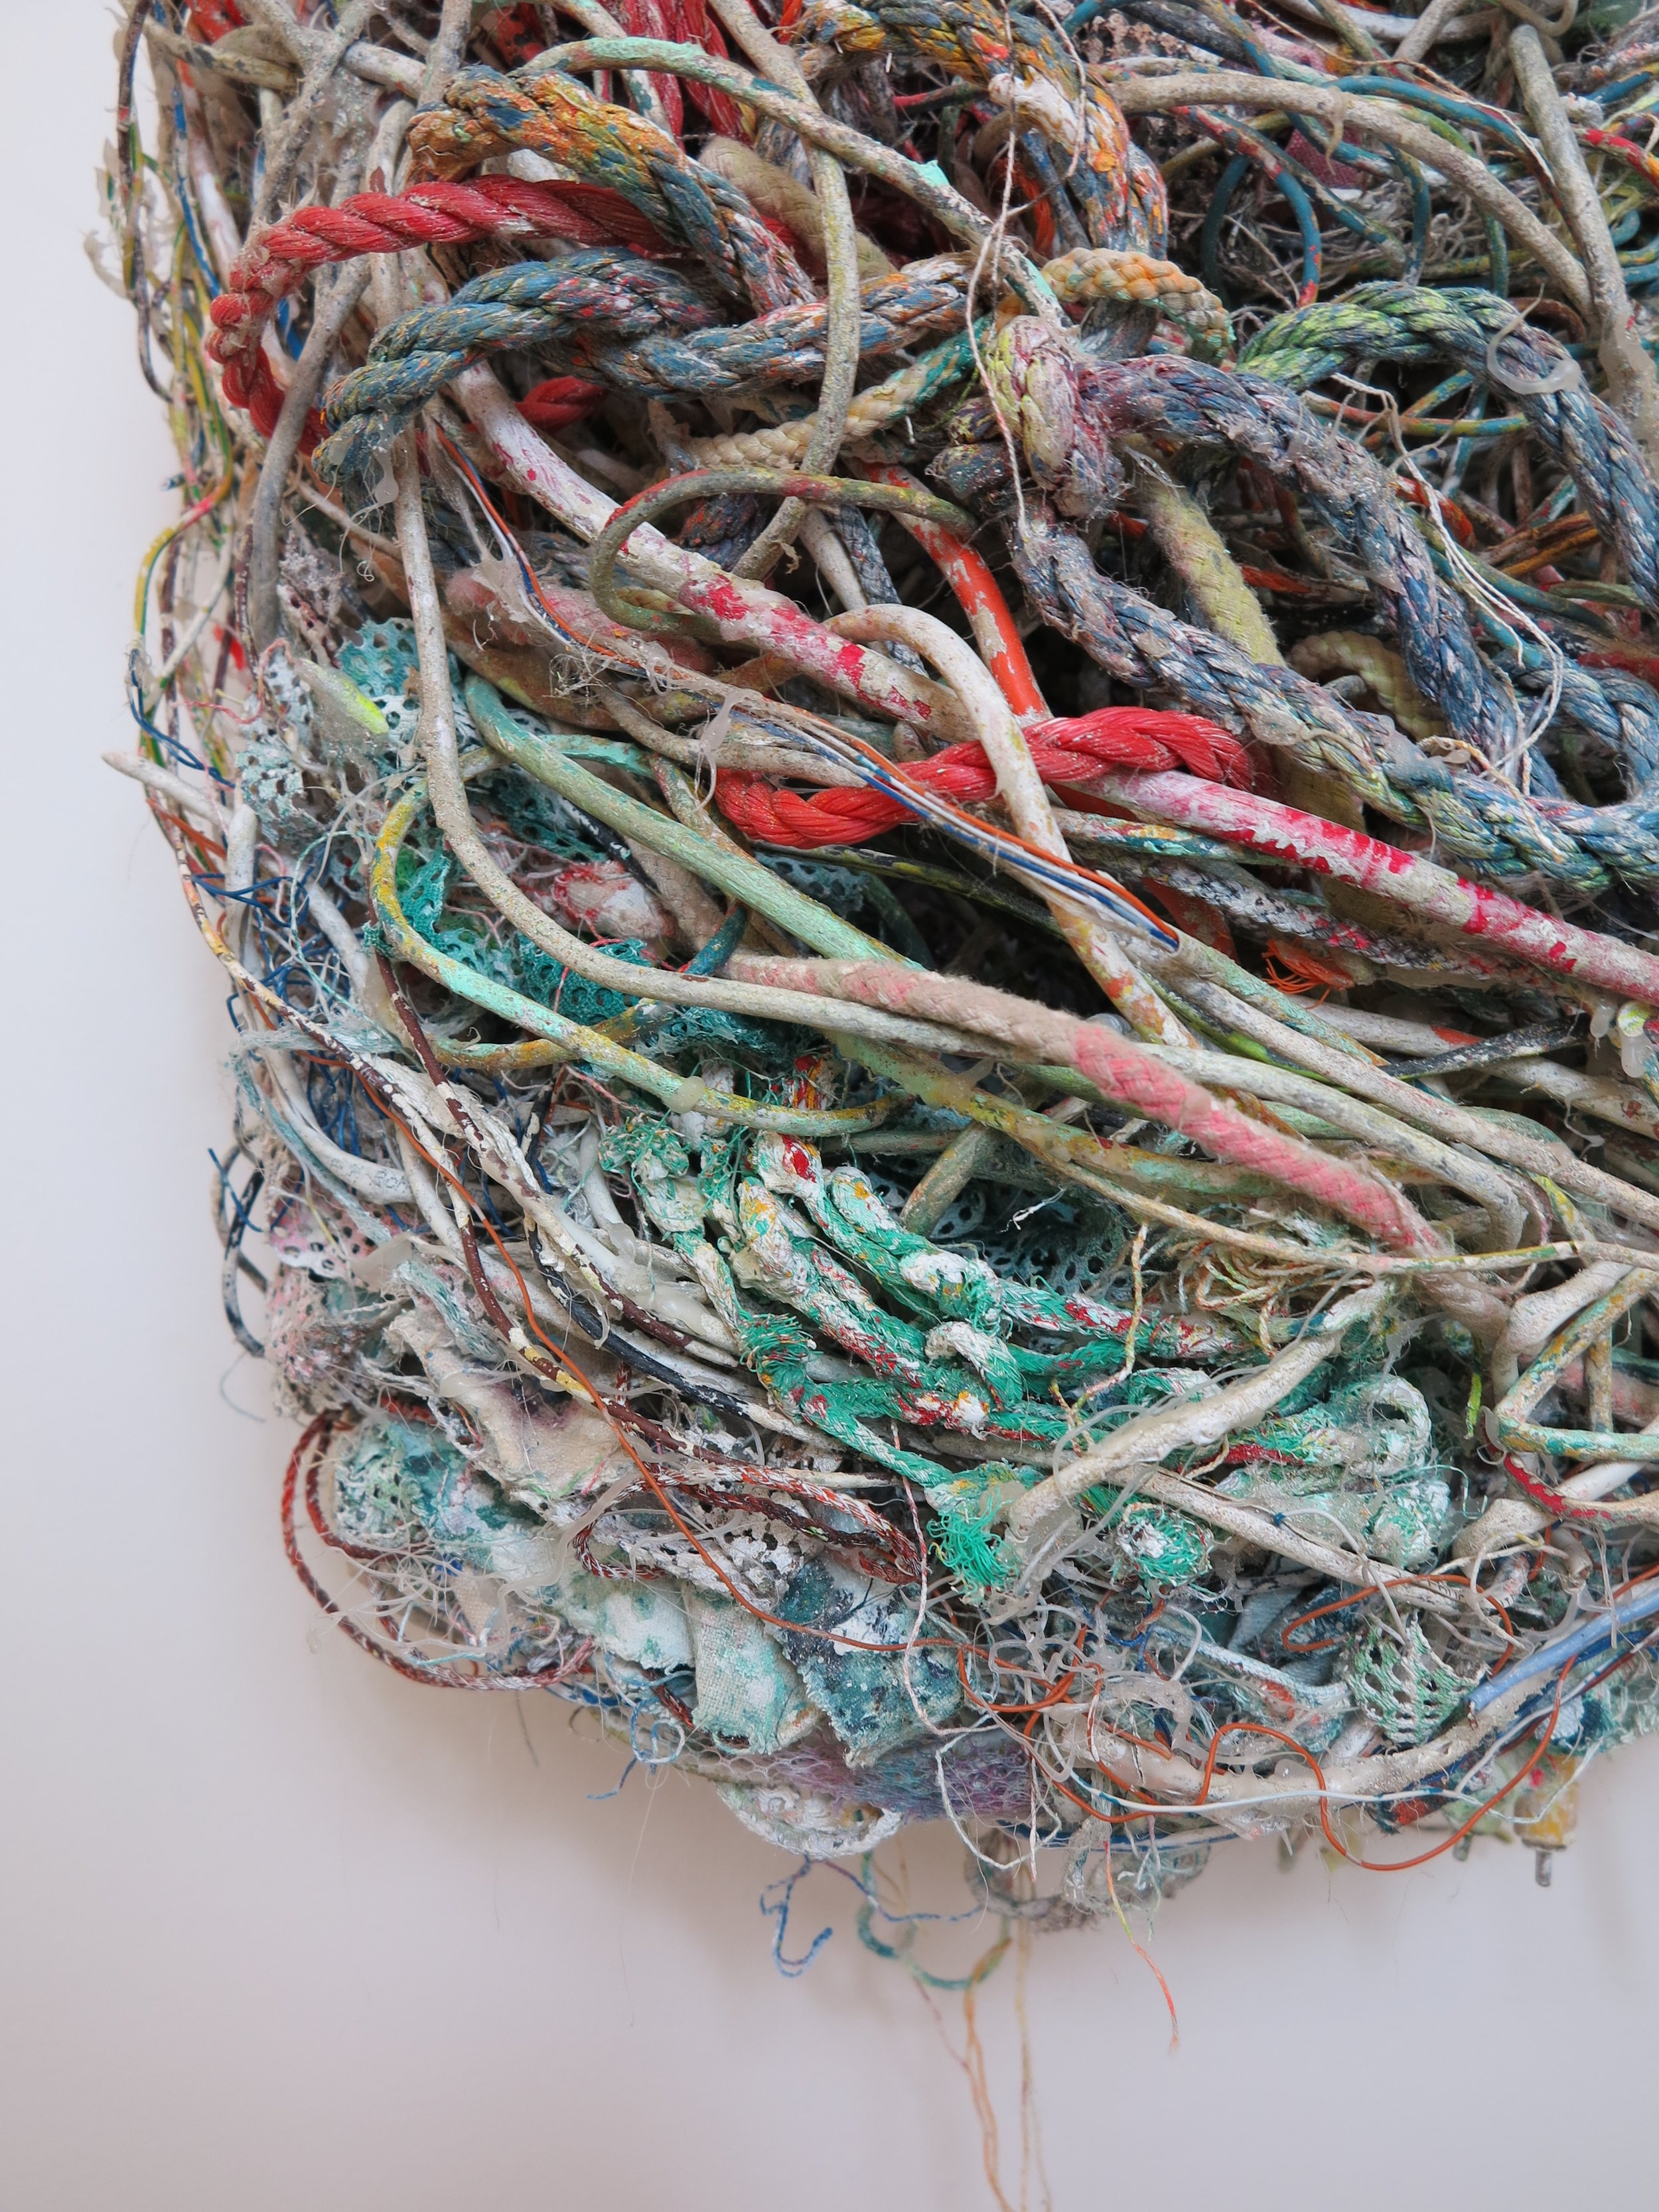   Entanglement (detail)   60 x 45 cm   Recovered electrical wires, fishing nets, ropes and studio detritus, bound to bedsprings  Part of the  You Turn Me Inside Out  solo exhibition at Fold Gallery, London 2022 